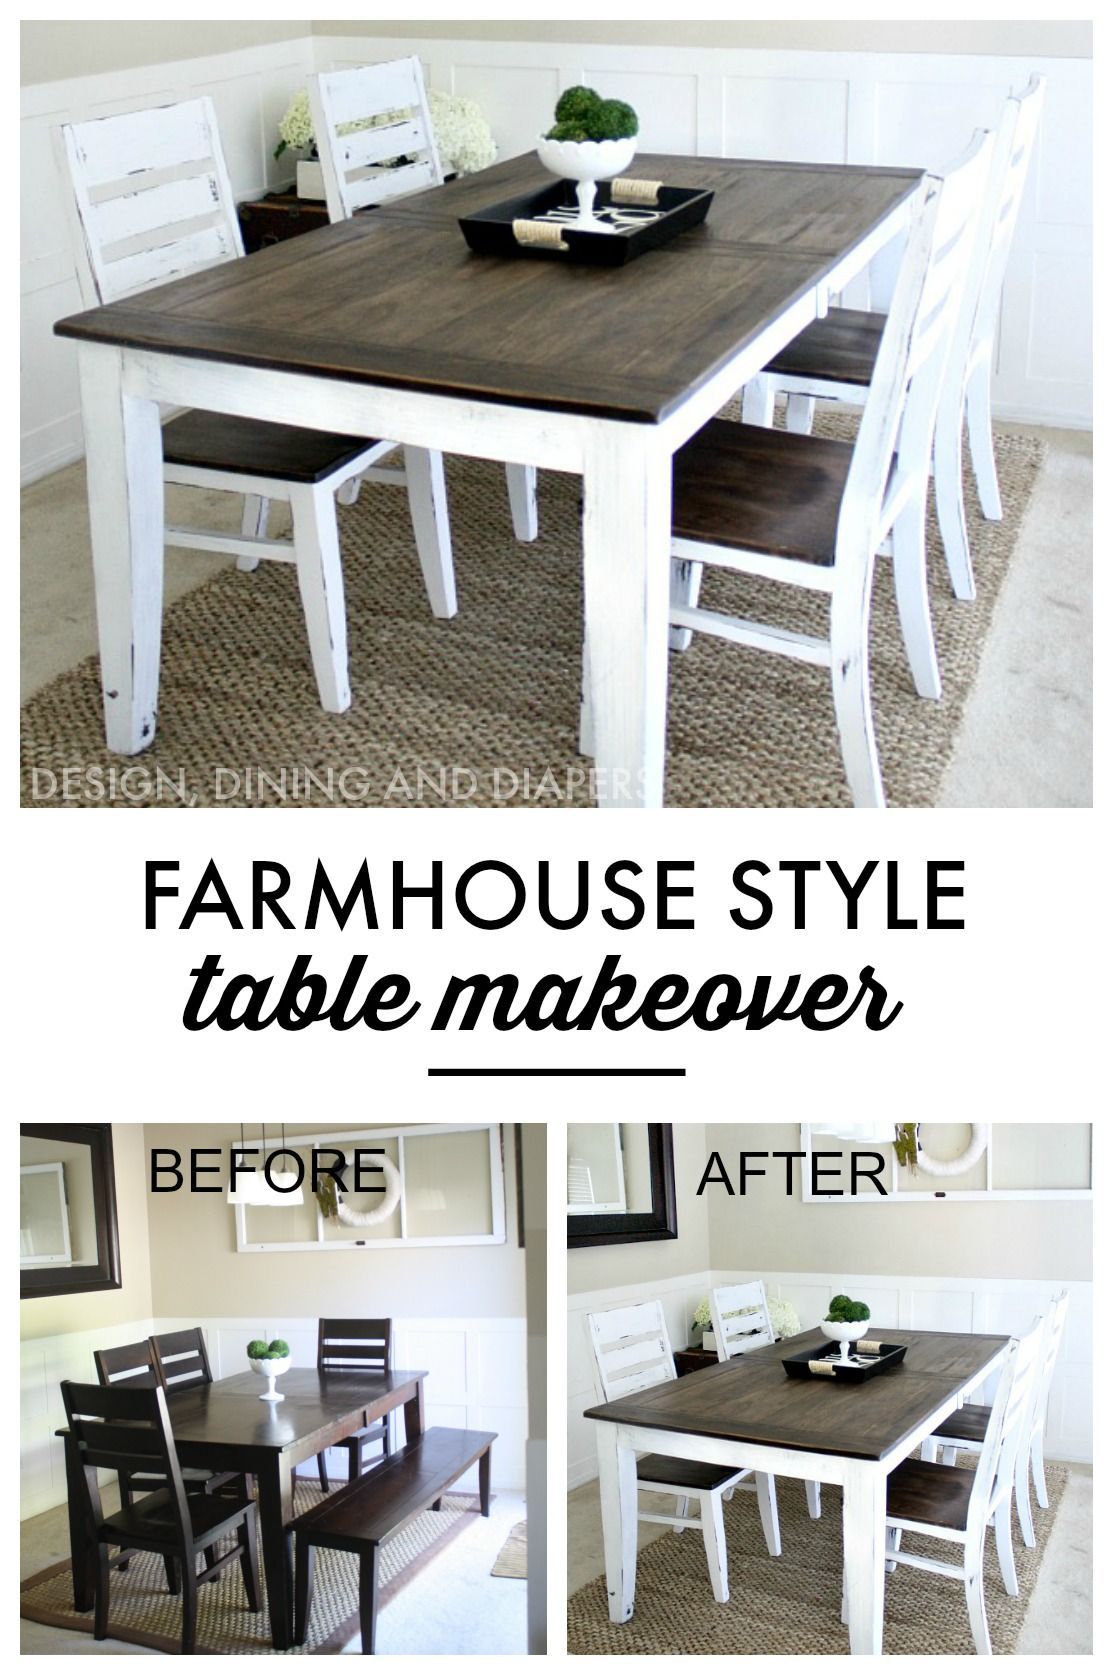 Learn how to easily transform your table into a piece with character. via @tarynatddd